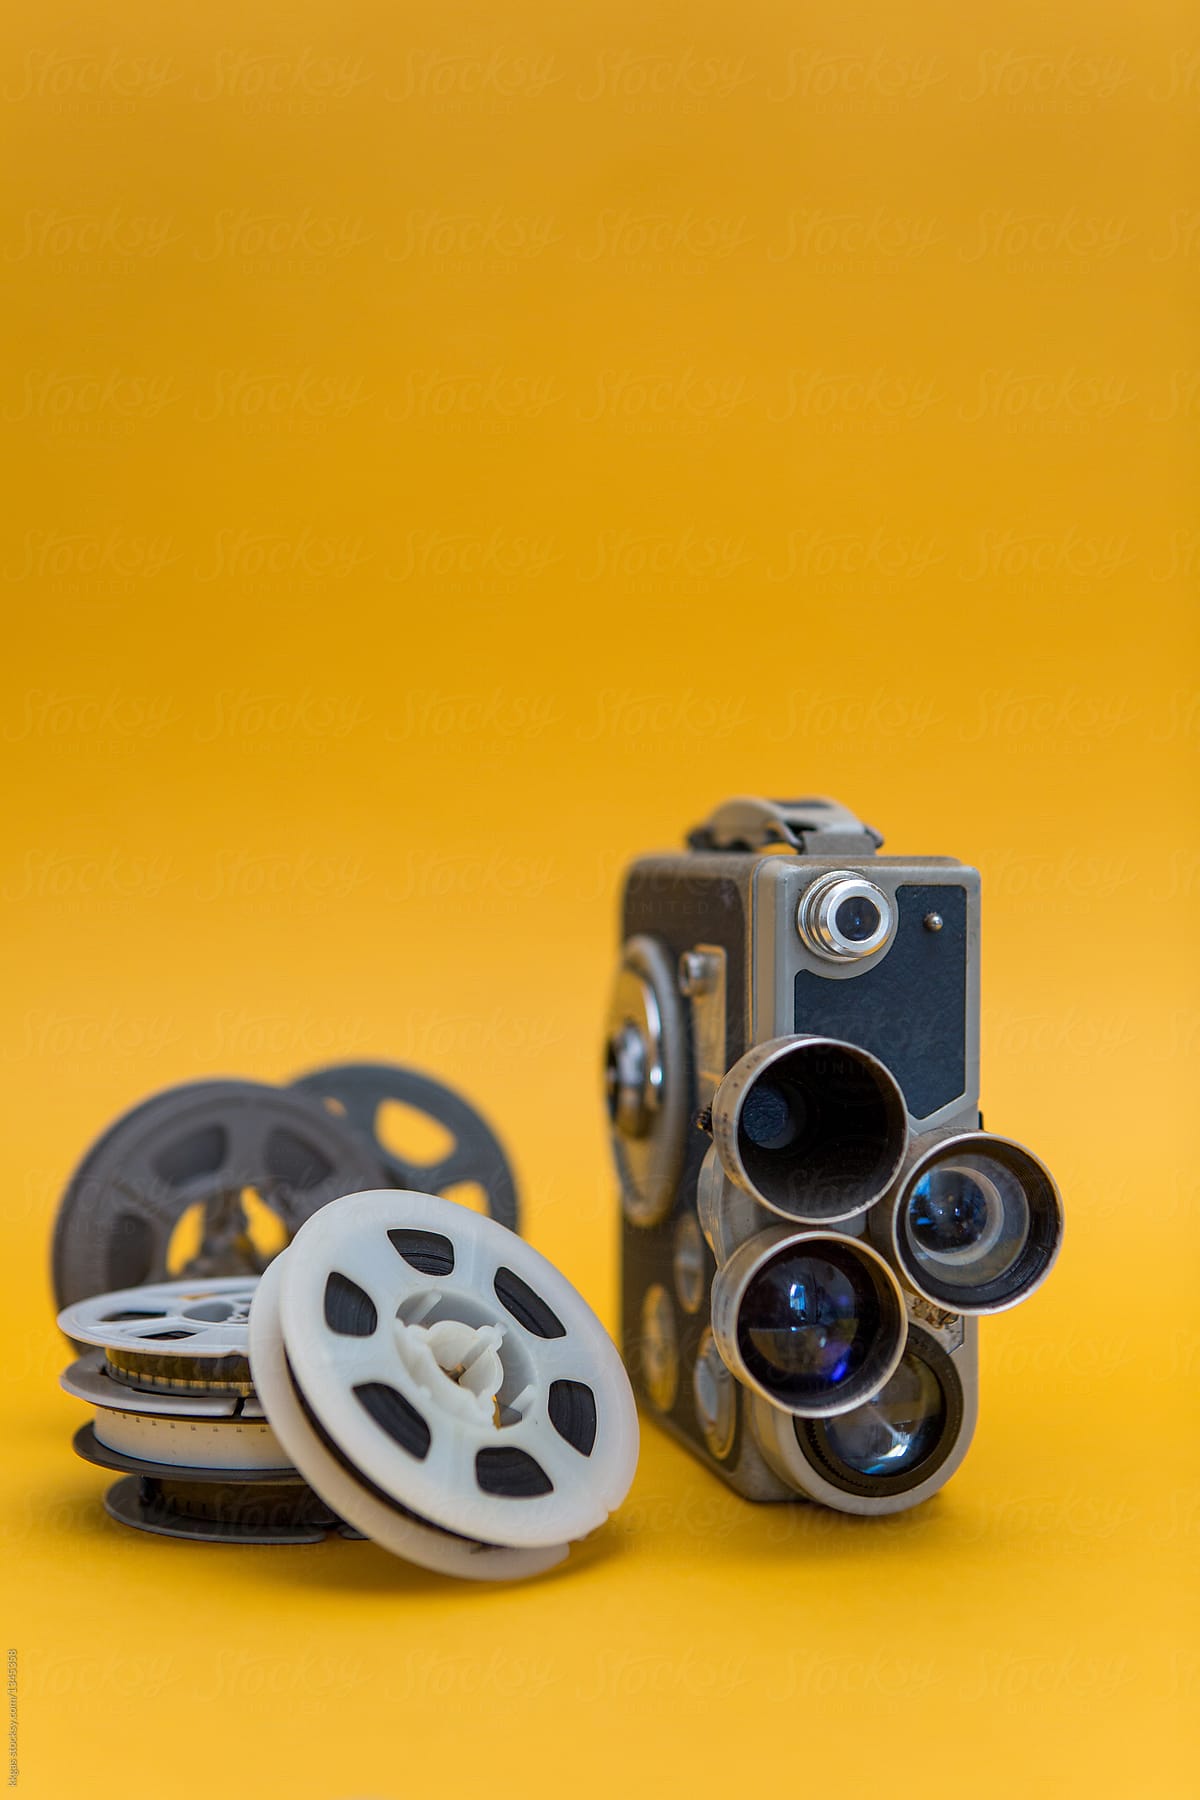 Vintage Cinema Camera And Reels Over Yellow Background by Stocksy  Contributor Kkgas - Stocksy